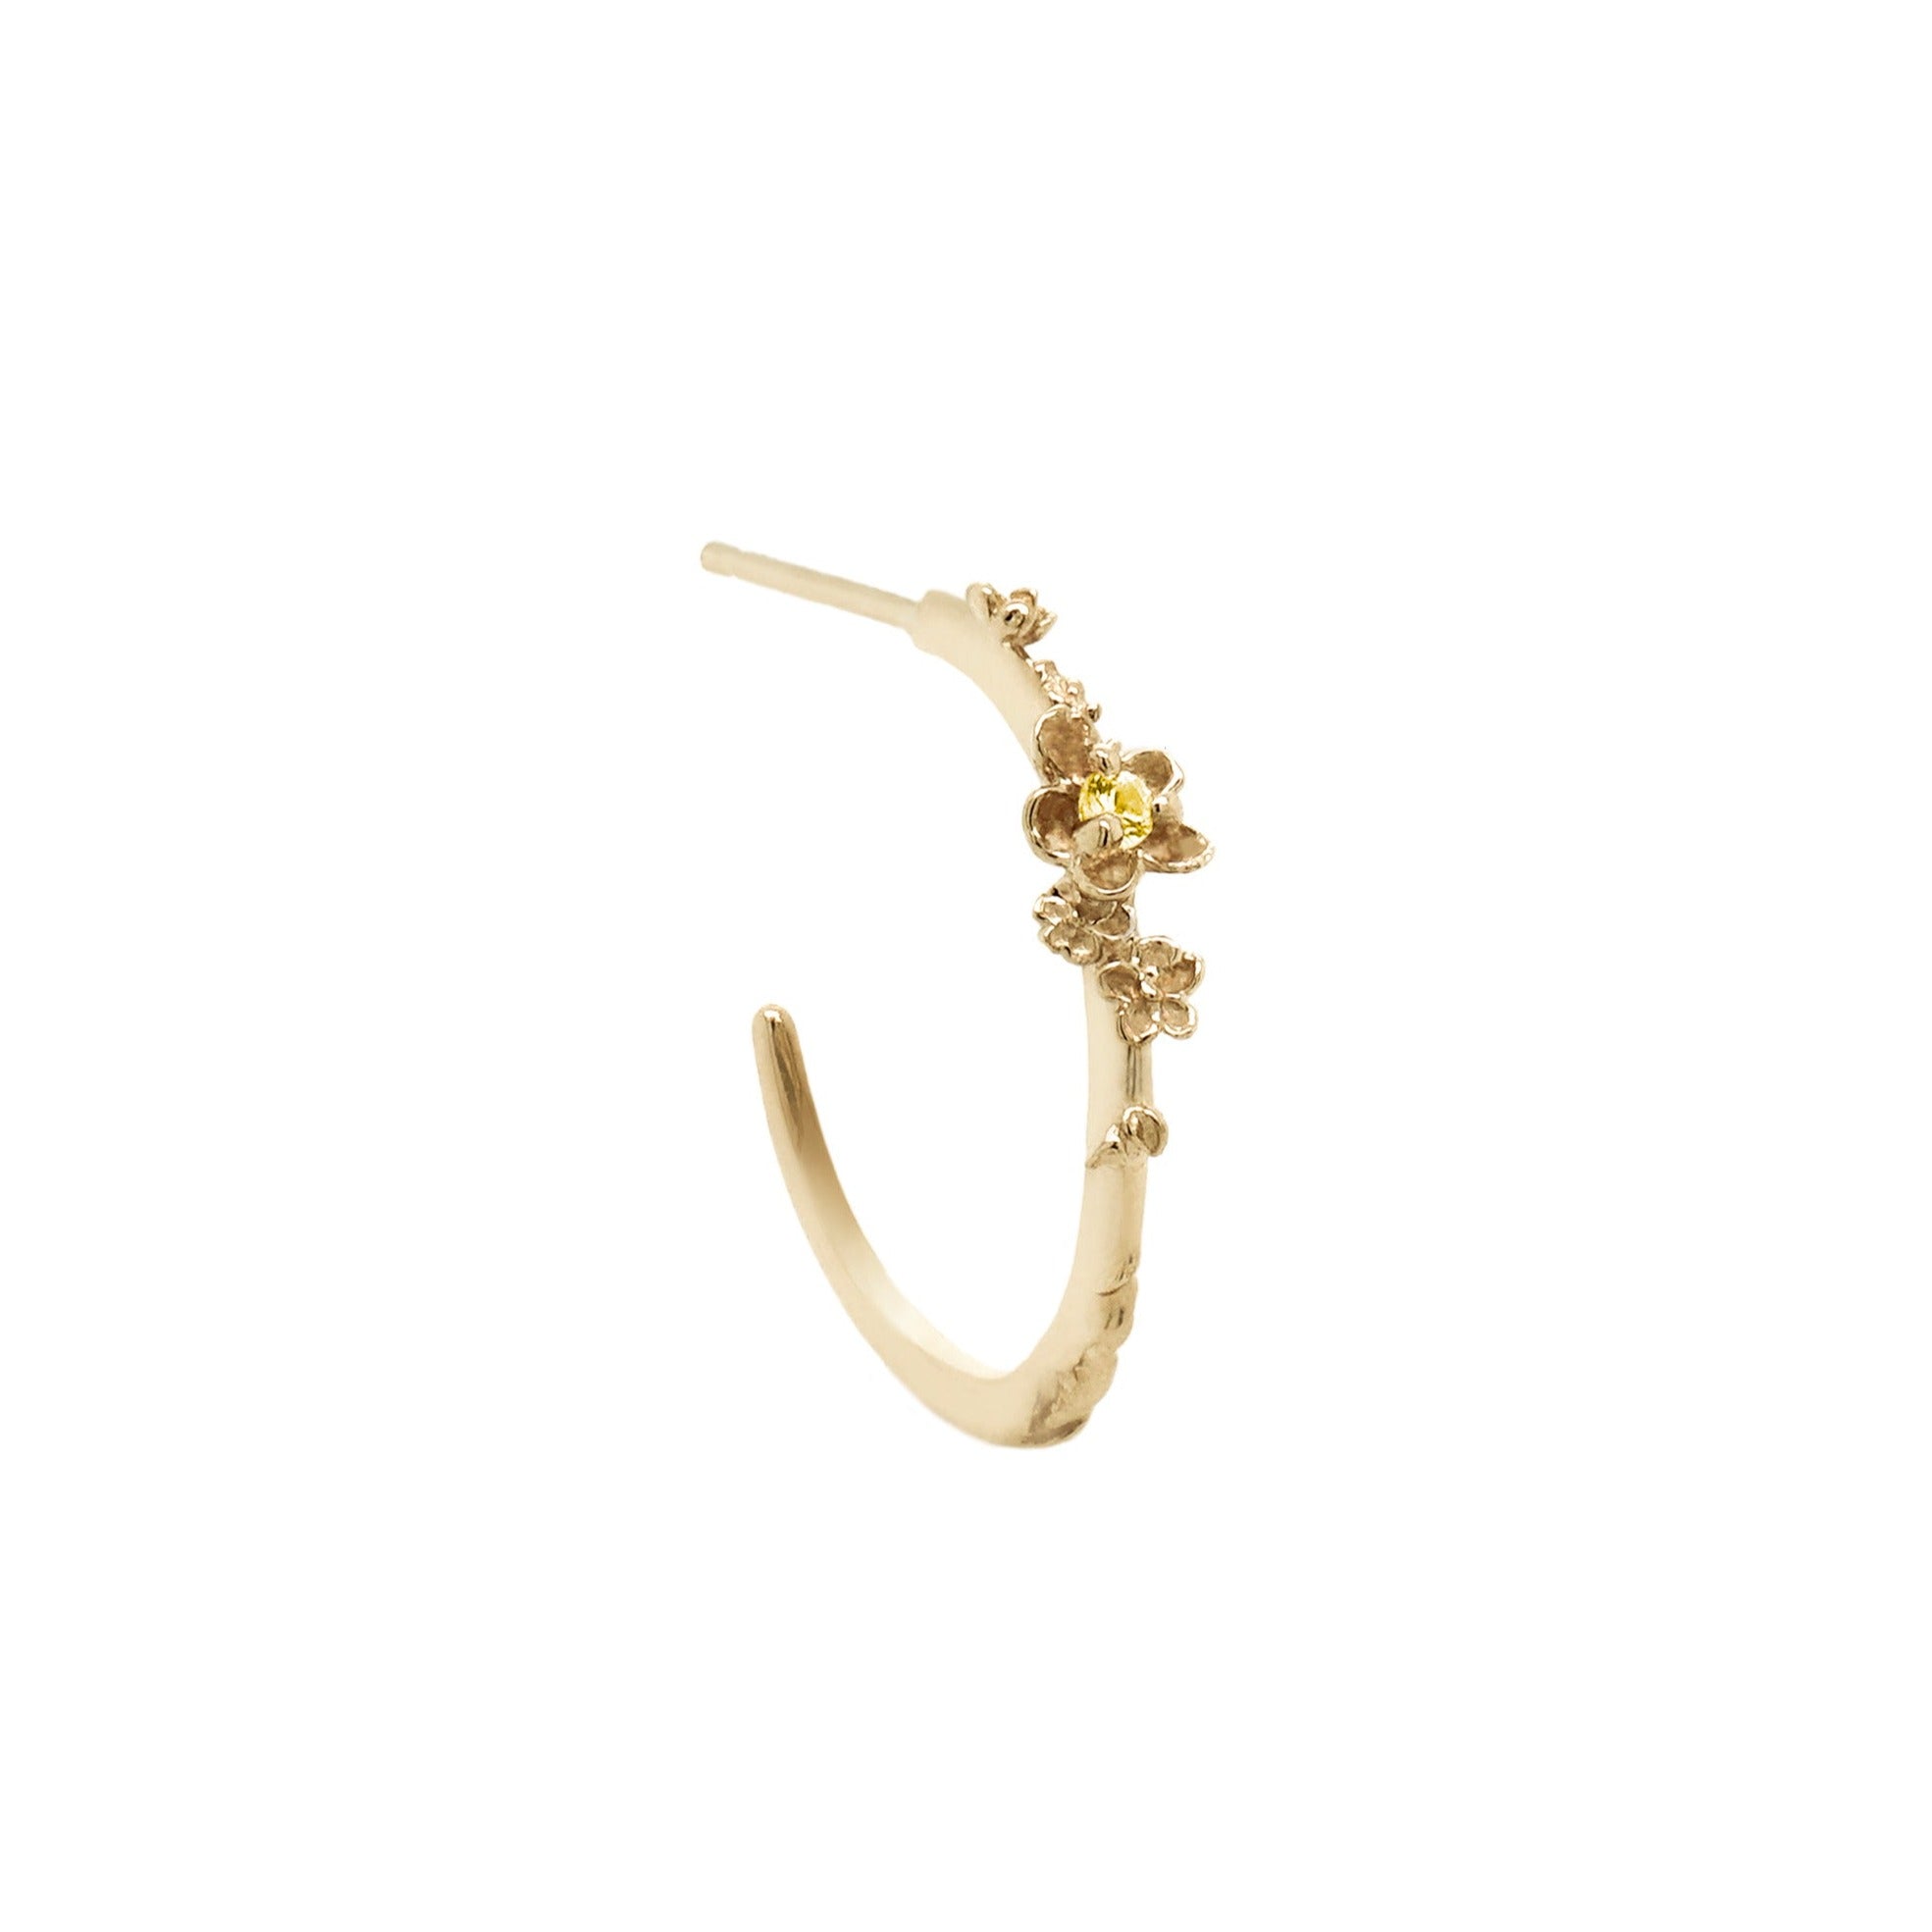 Laurie Fleming Jewellery "Large Buttercup Hoop" earring, featuring petite hand-carved buttercup flowers with a yellow sapphire centre. The earring is on a white background.